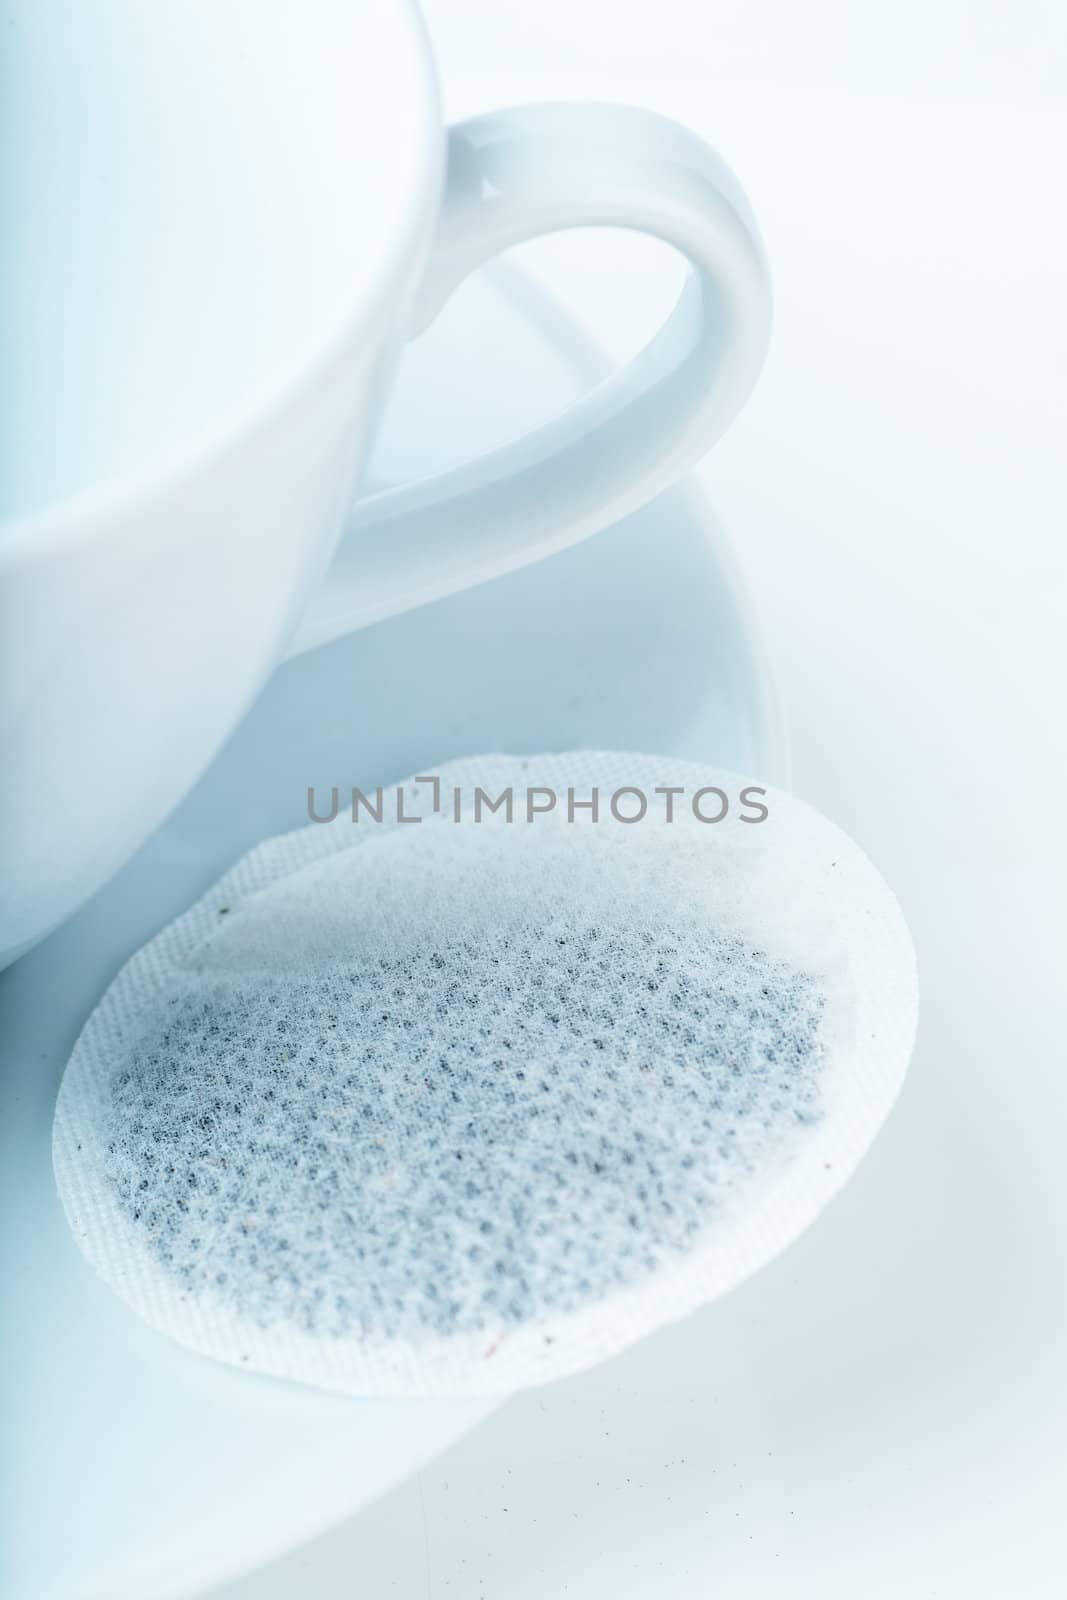 Closeup view of empty cup and teabag on a plate